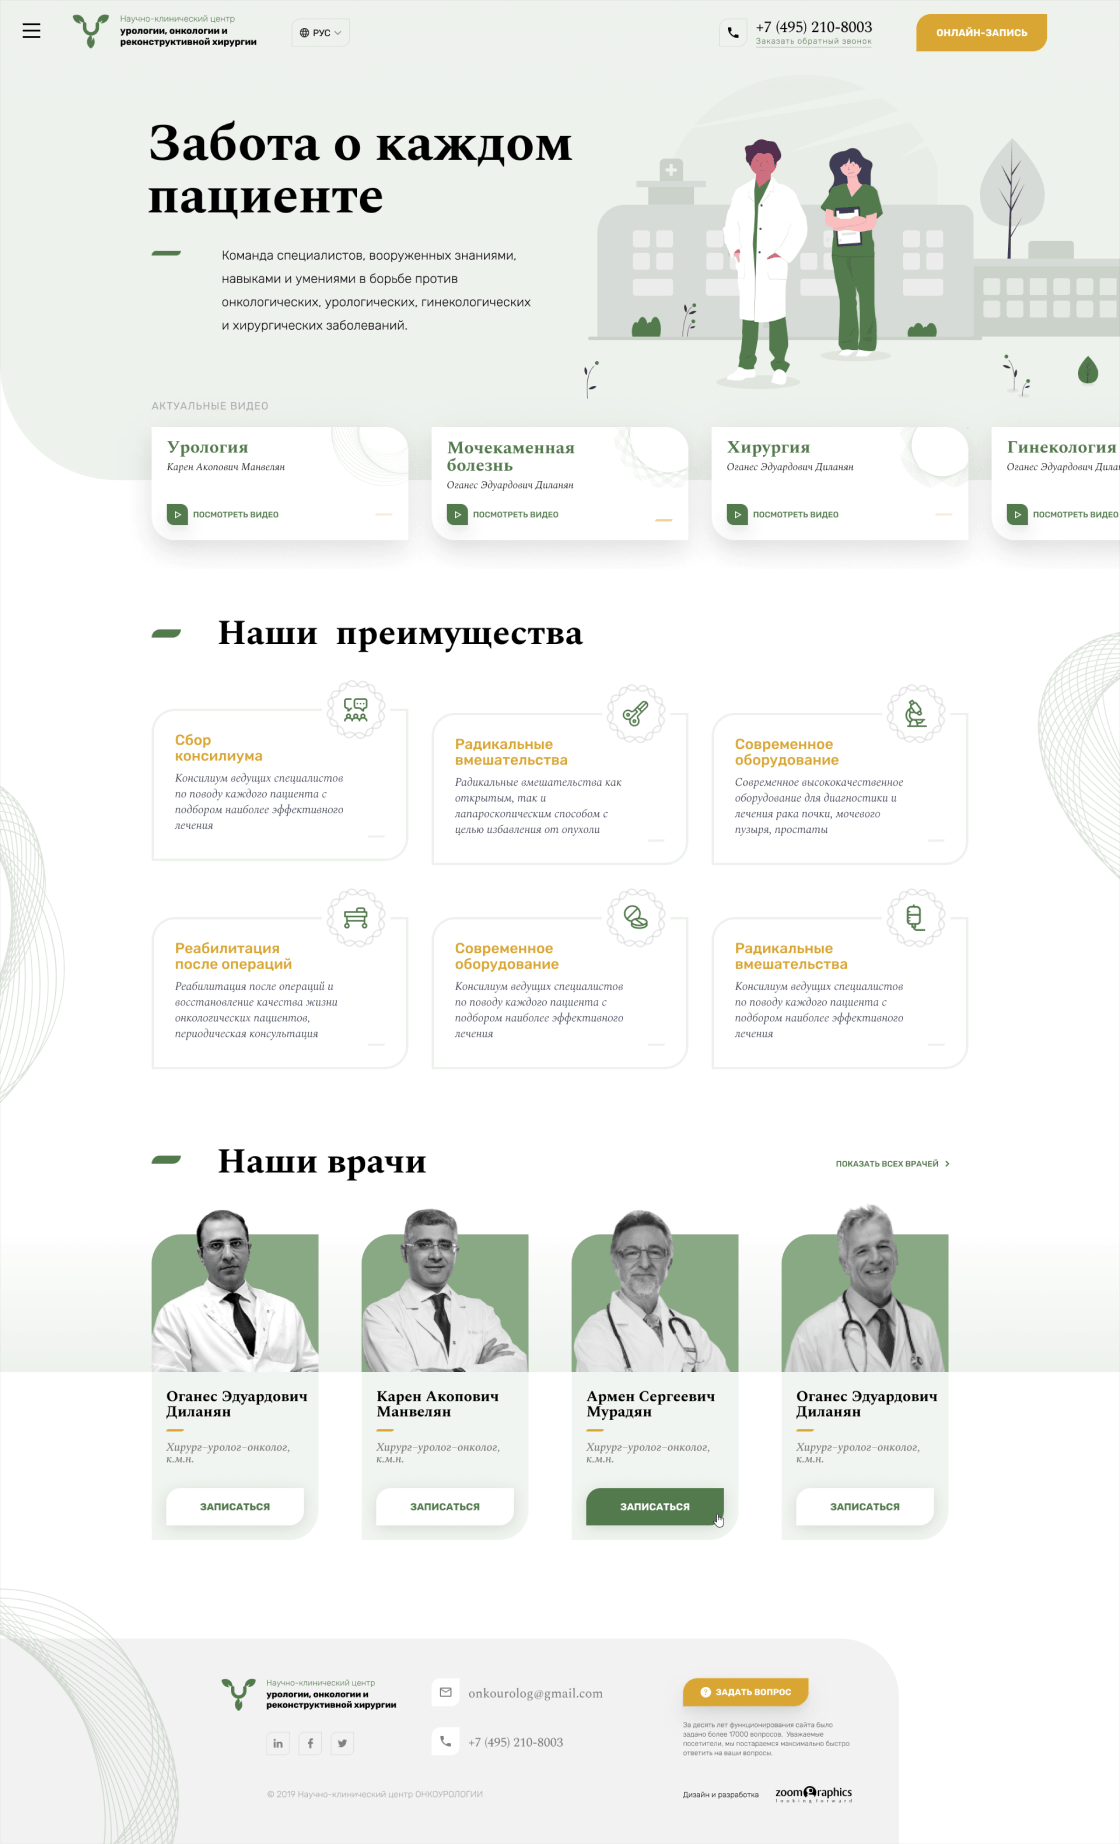 Dr. Dilanyan's medical center of urology, oncology & surgery